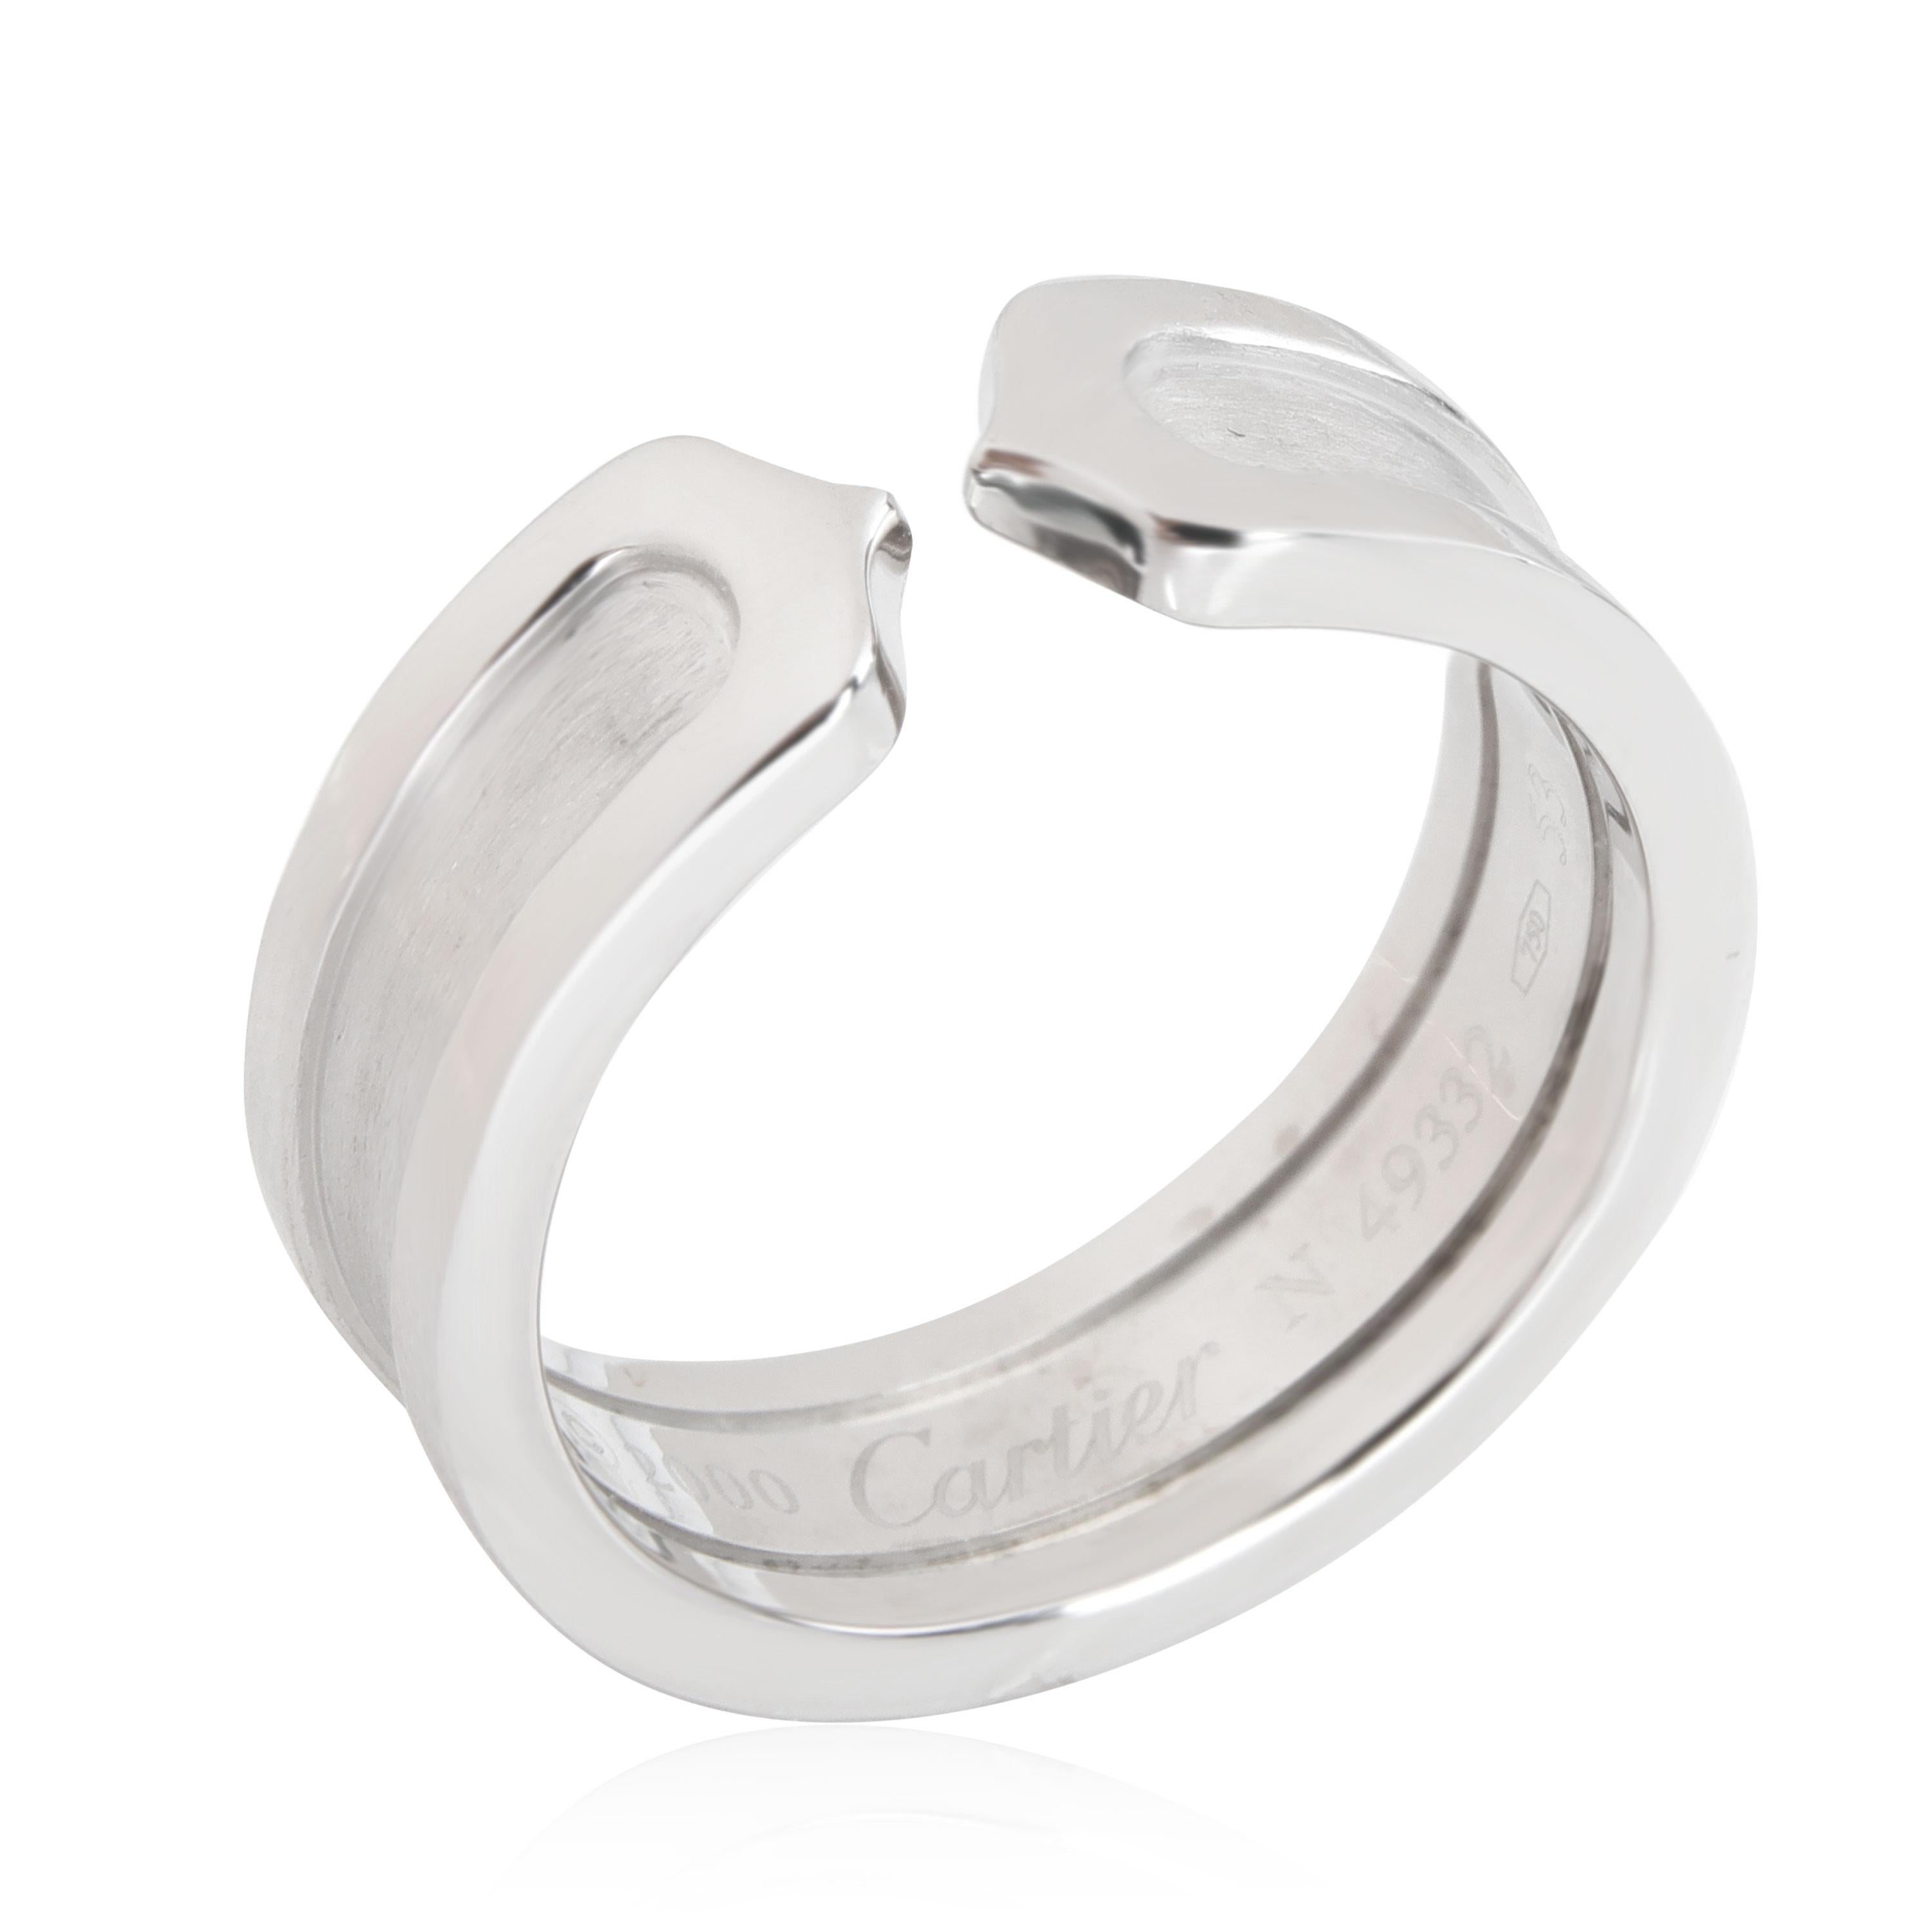 Cartier C De Cartier Band in 18kt White Gold For Sale 1